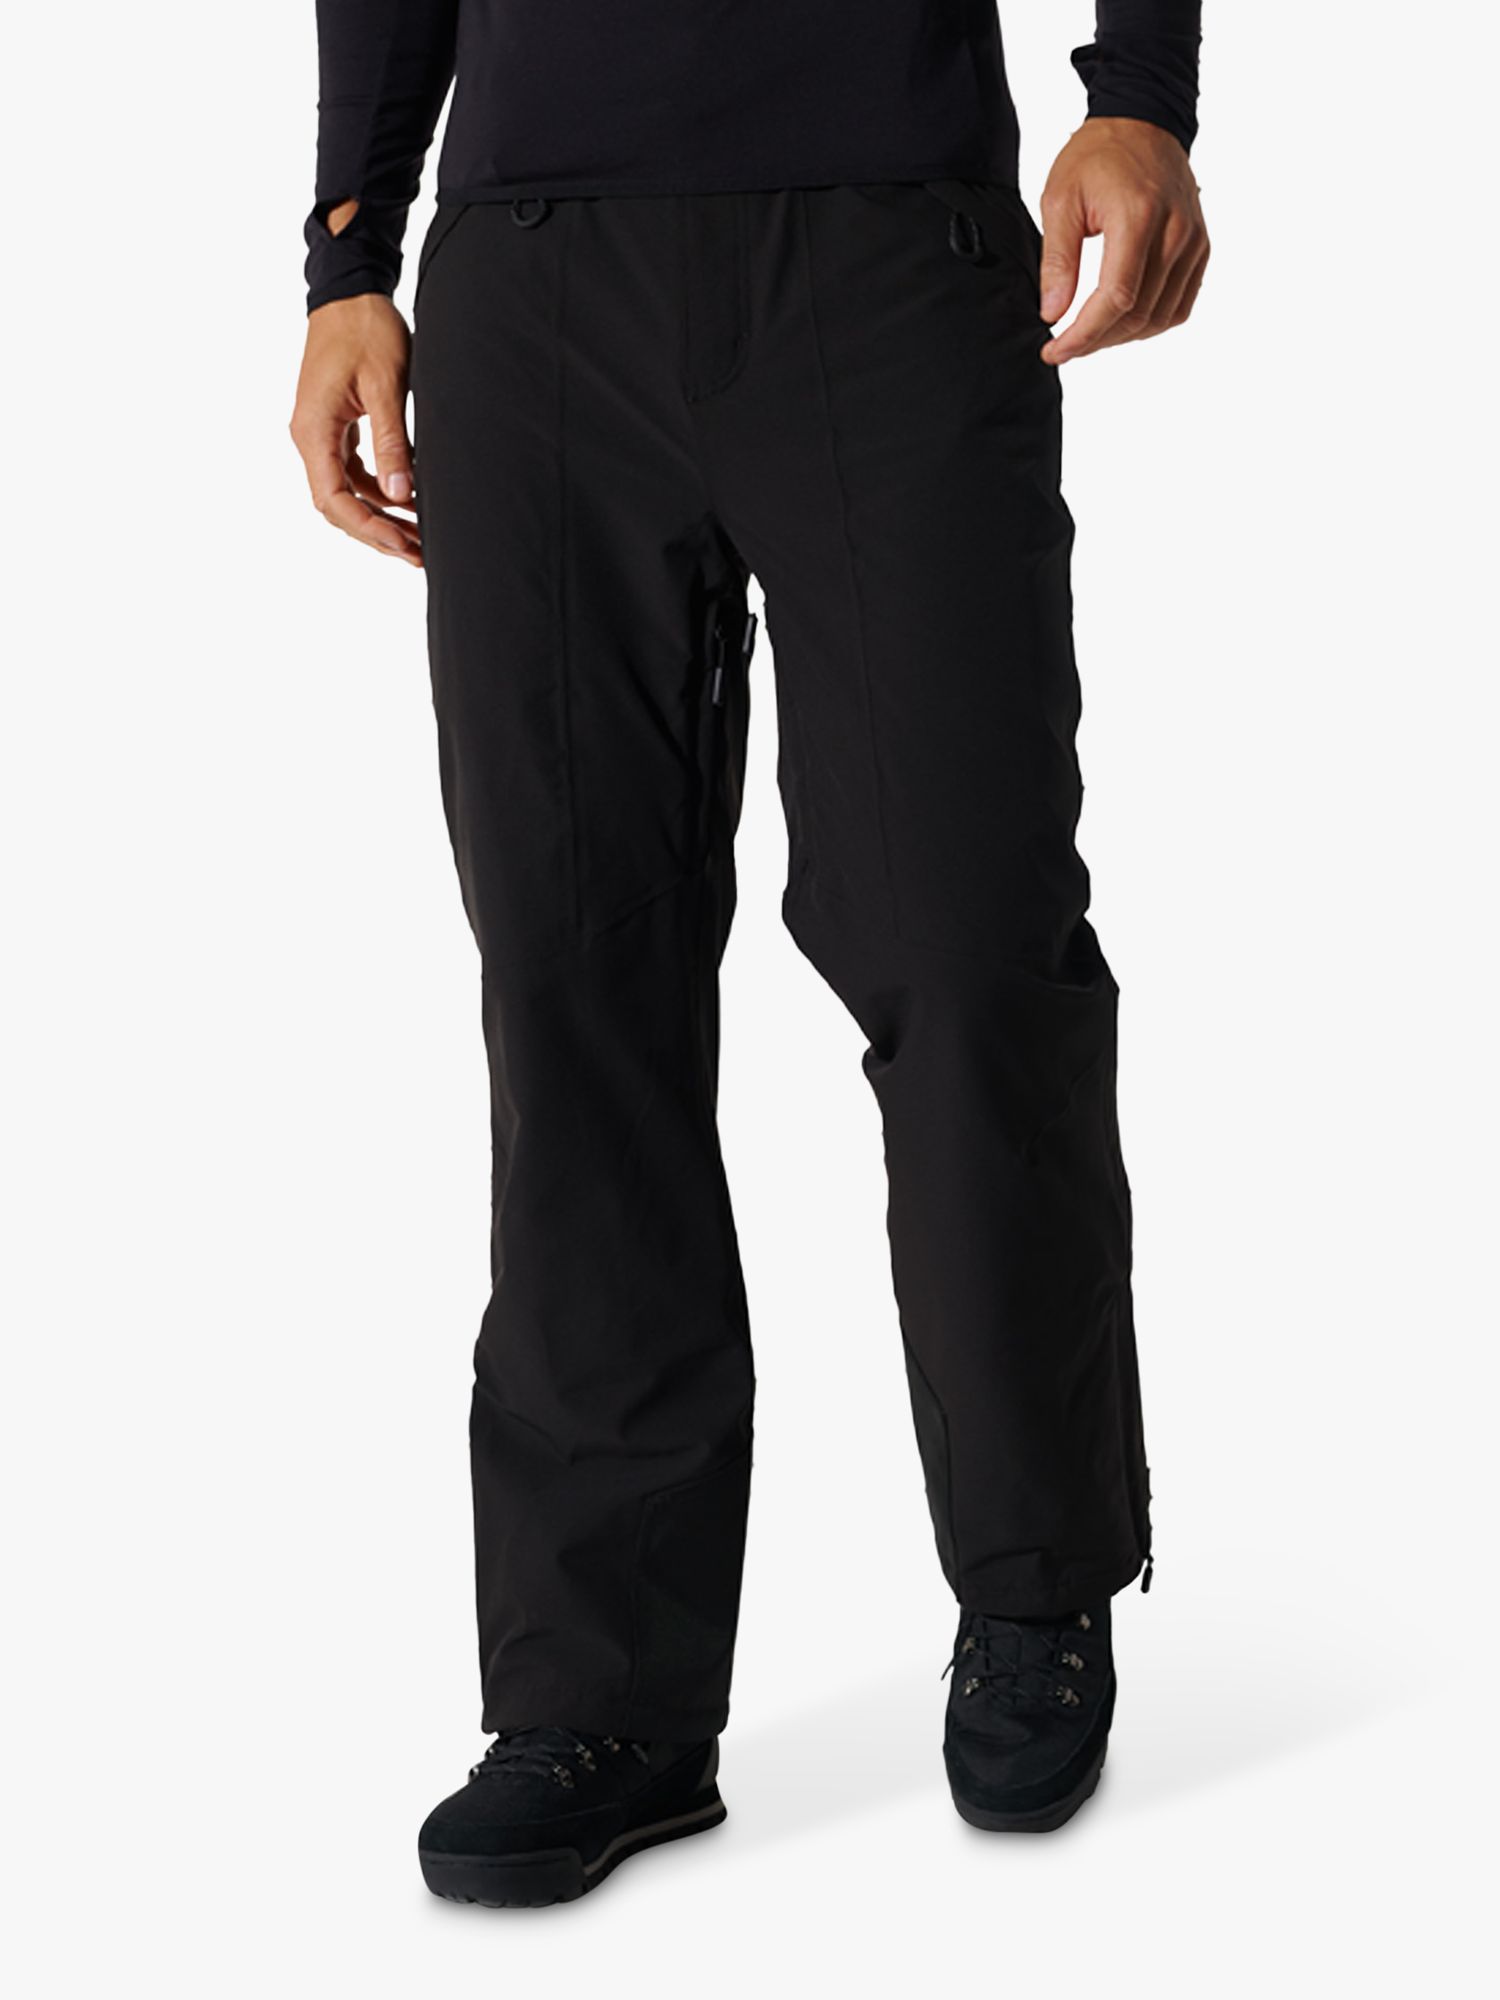 Superdry Clean Pro Ski Trousers at John Lewis & Partners